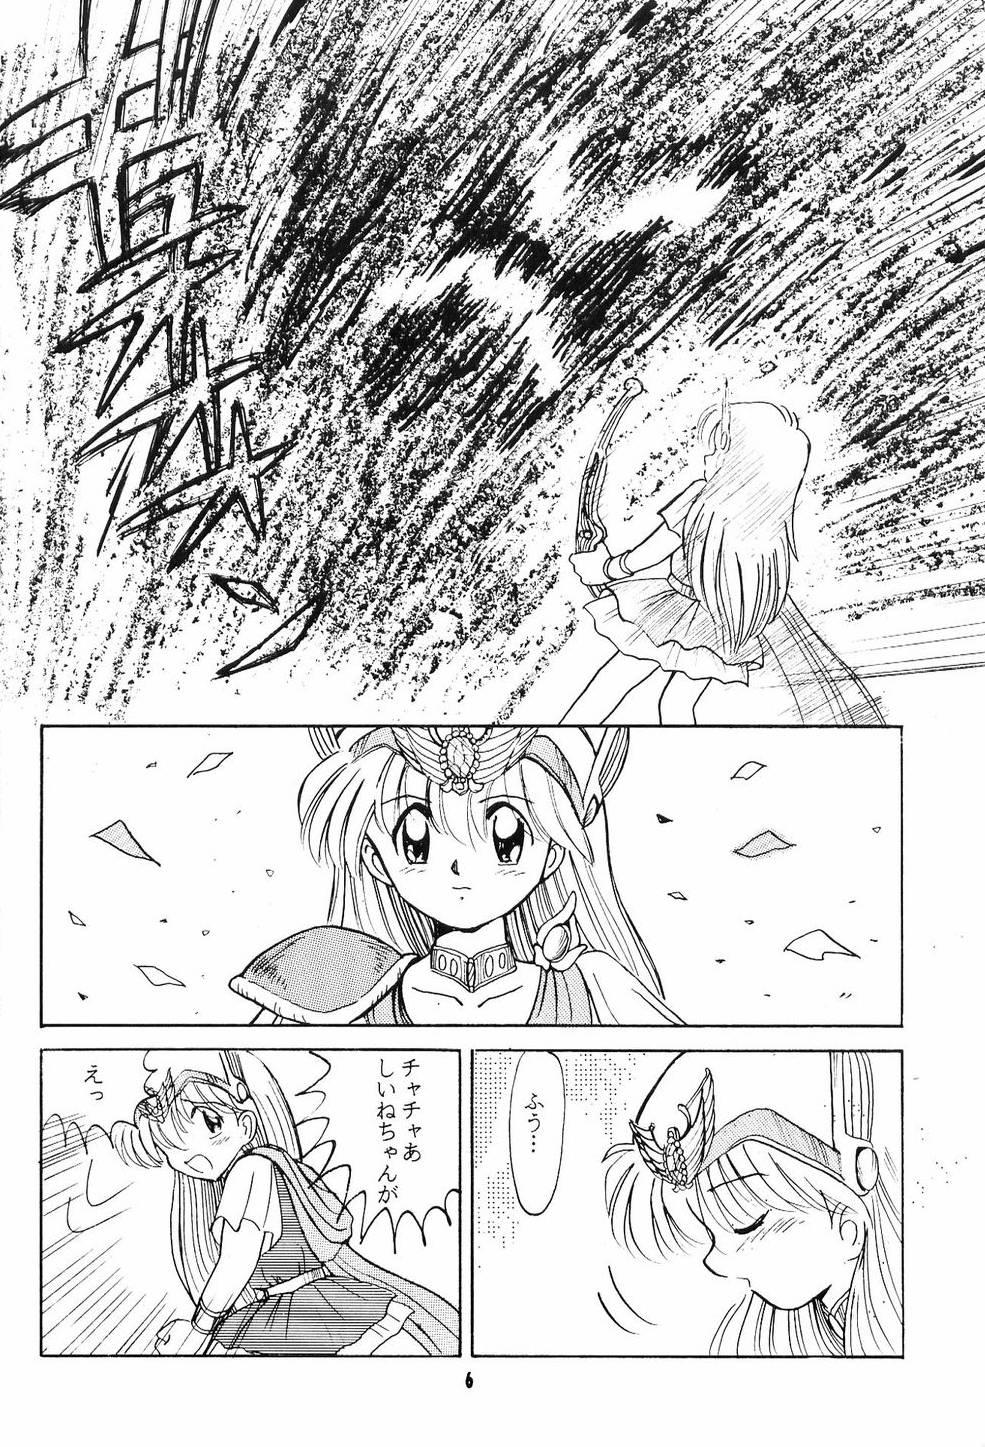 Pounded Little Red Riding Hood - Akazukin cha cha Reversecowgirl - Page 5